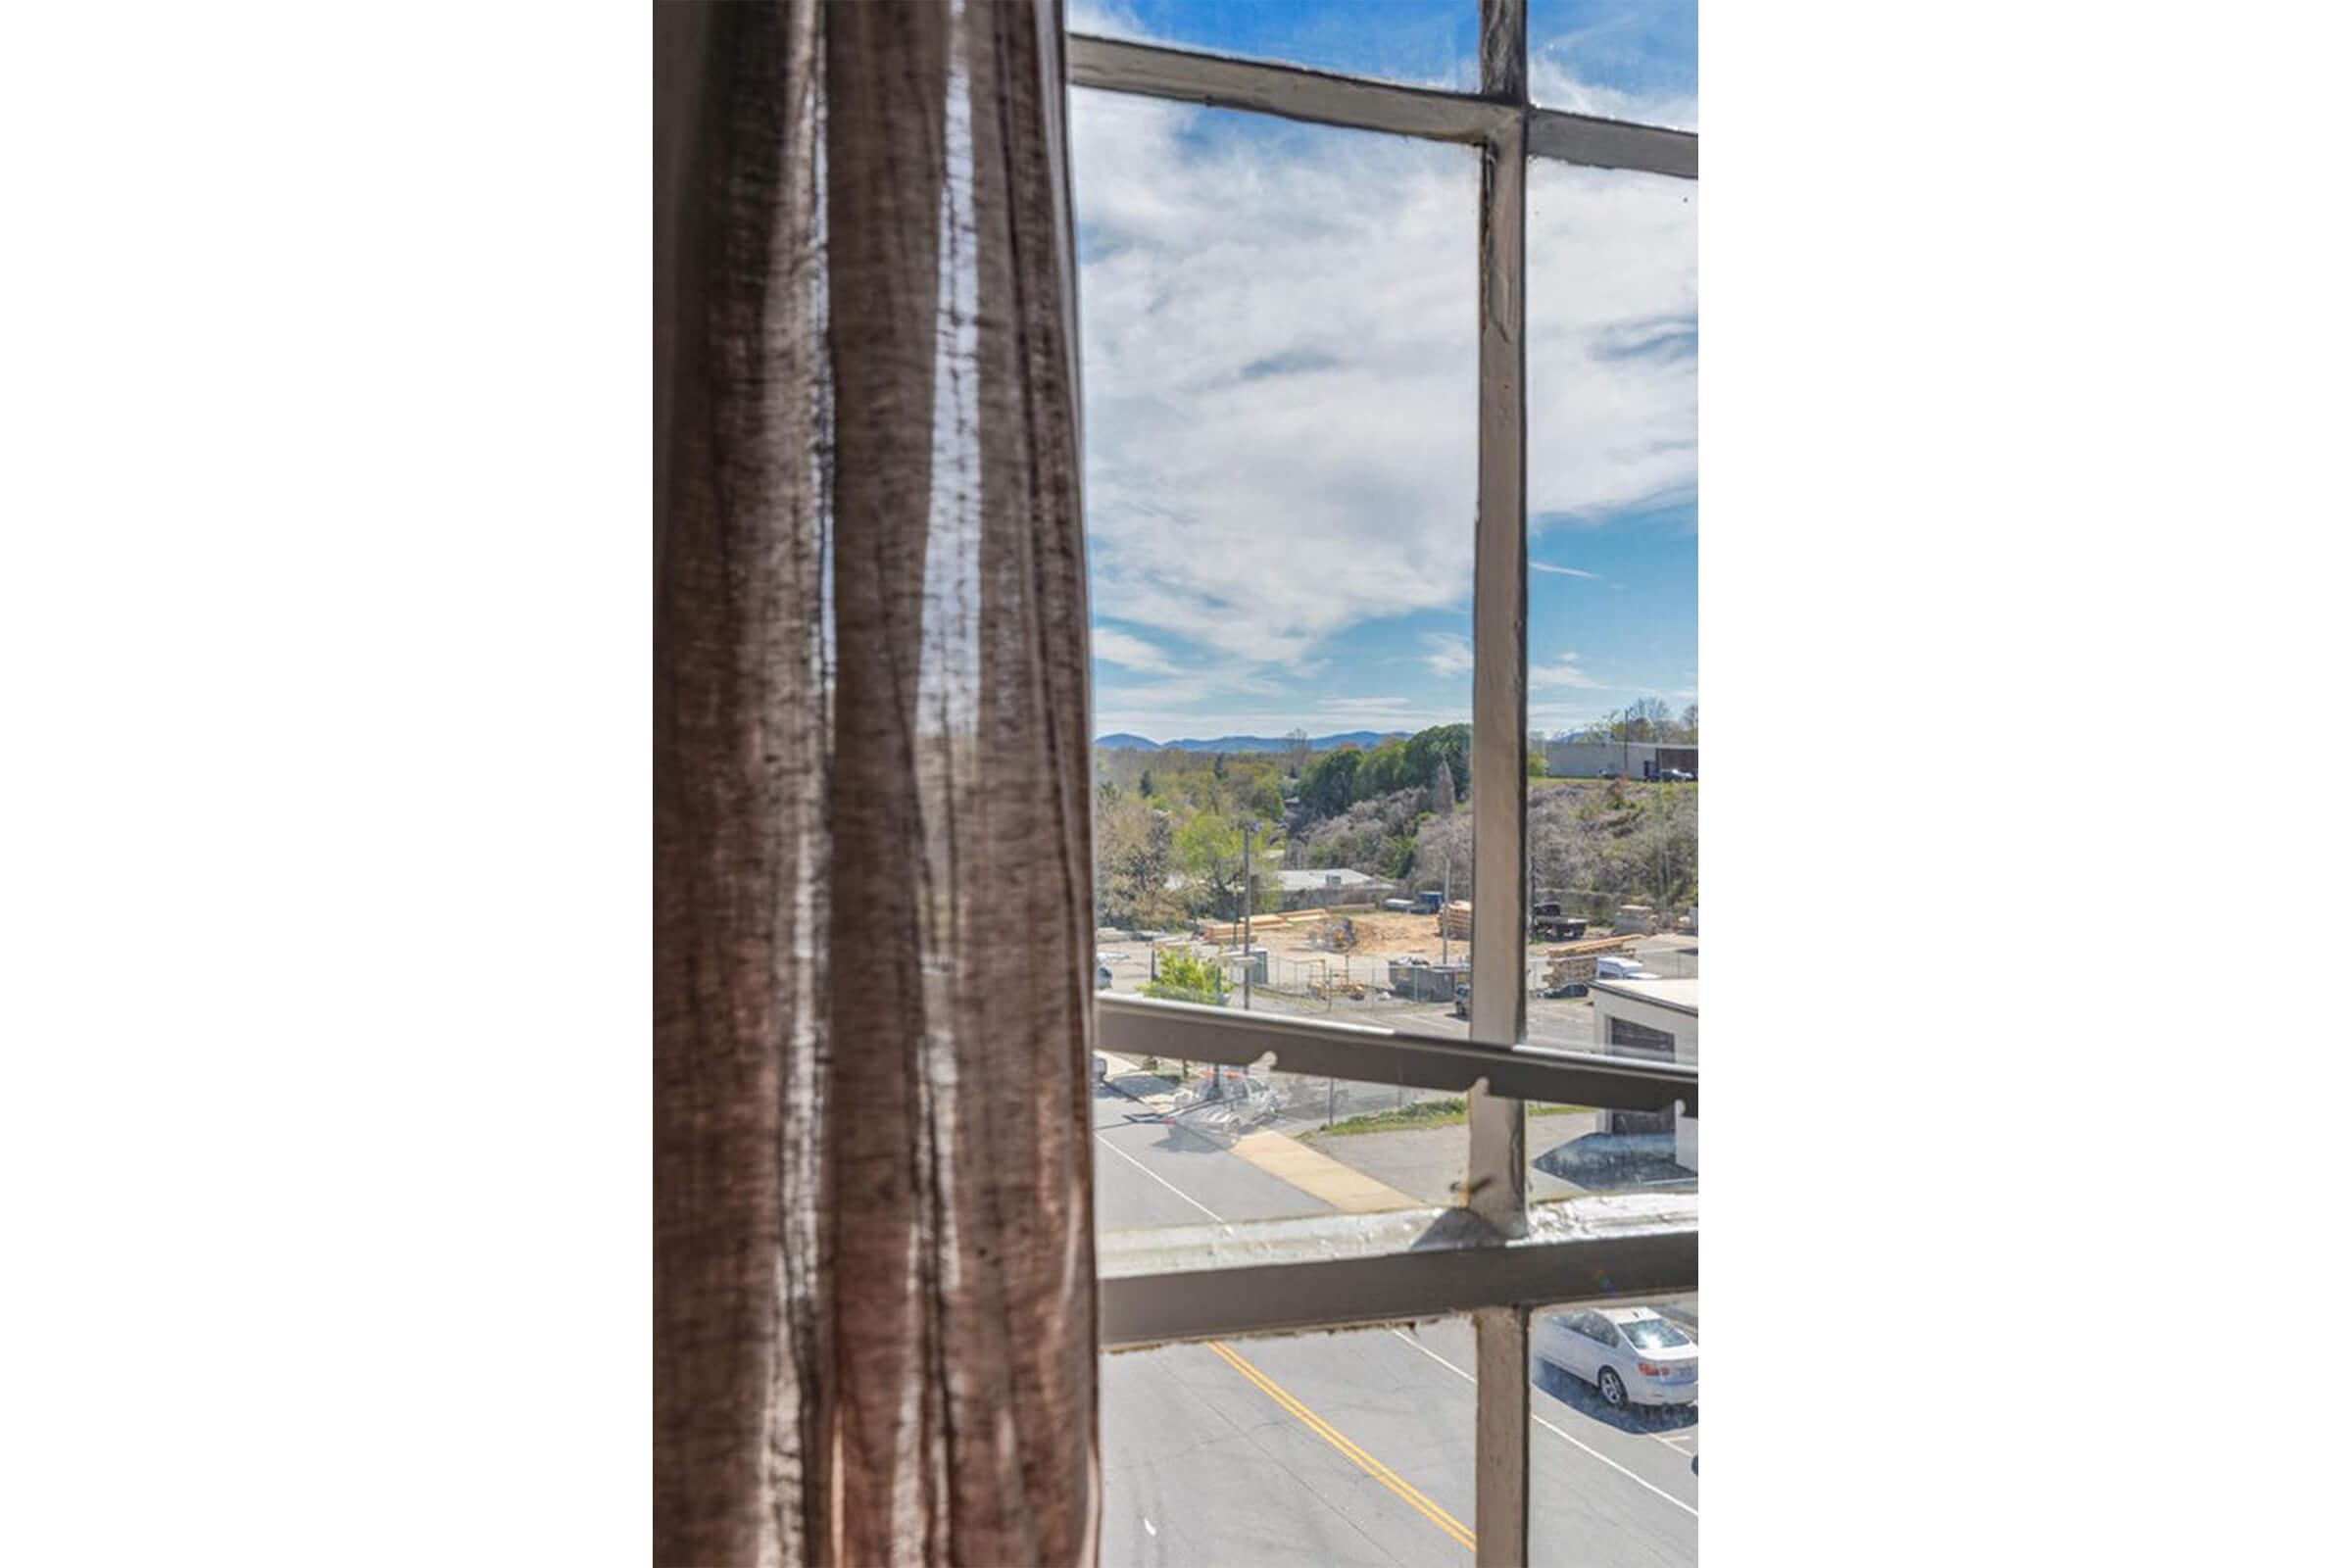 Views available at The Lofts at South Slope in Asheville, NC.